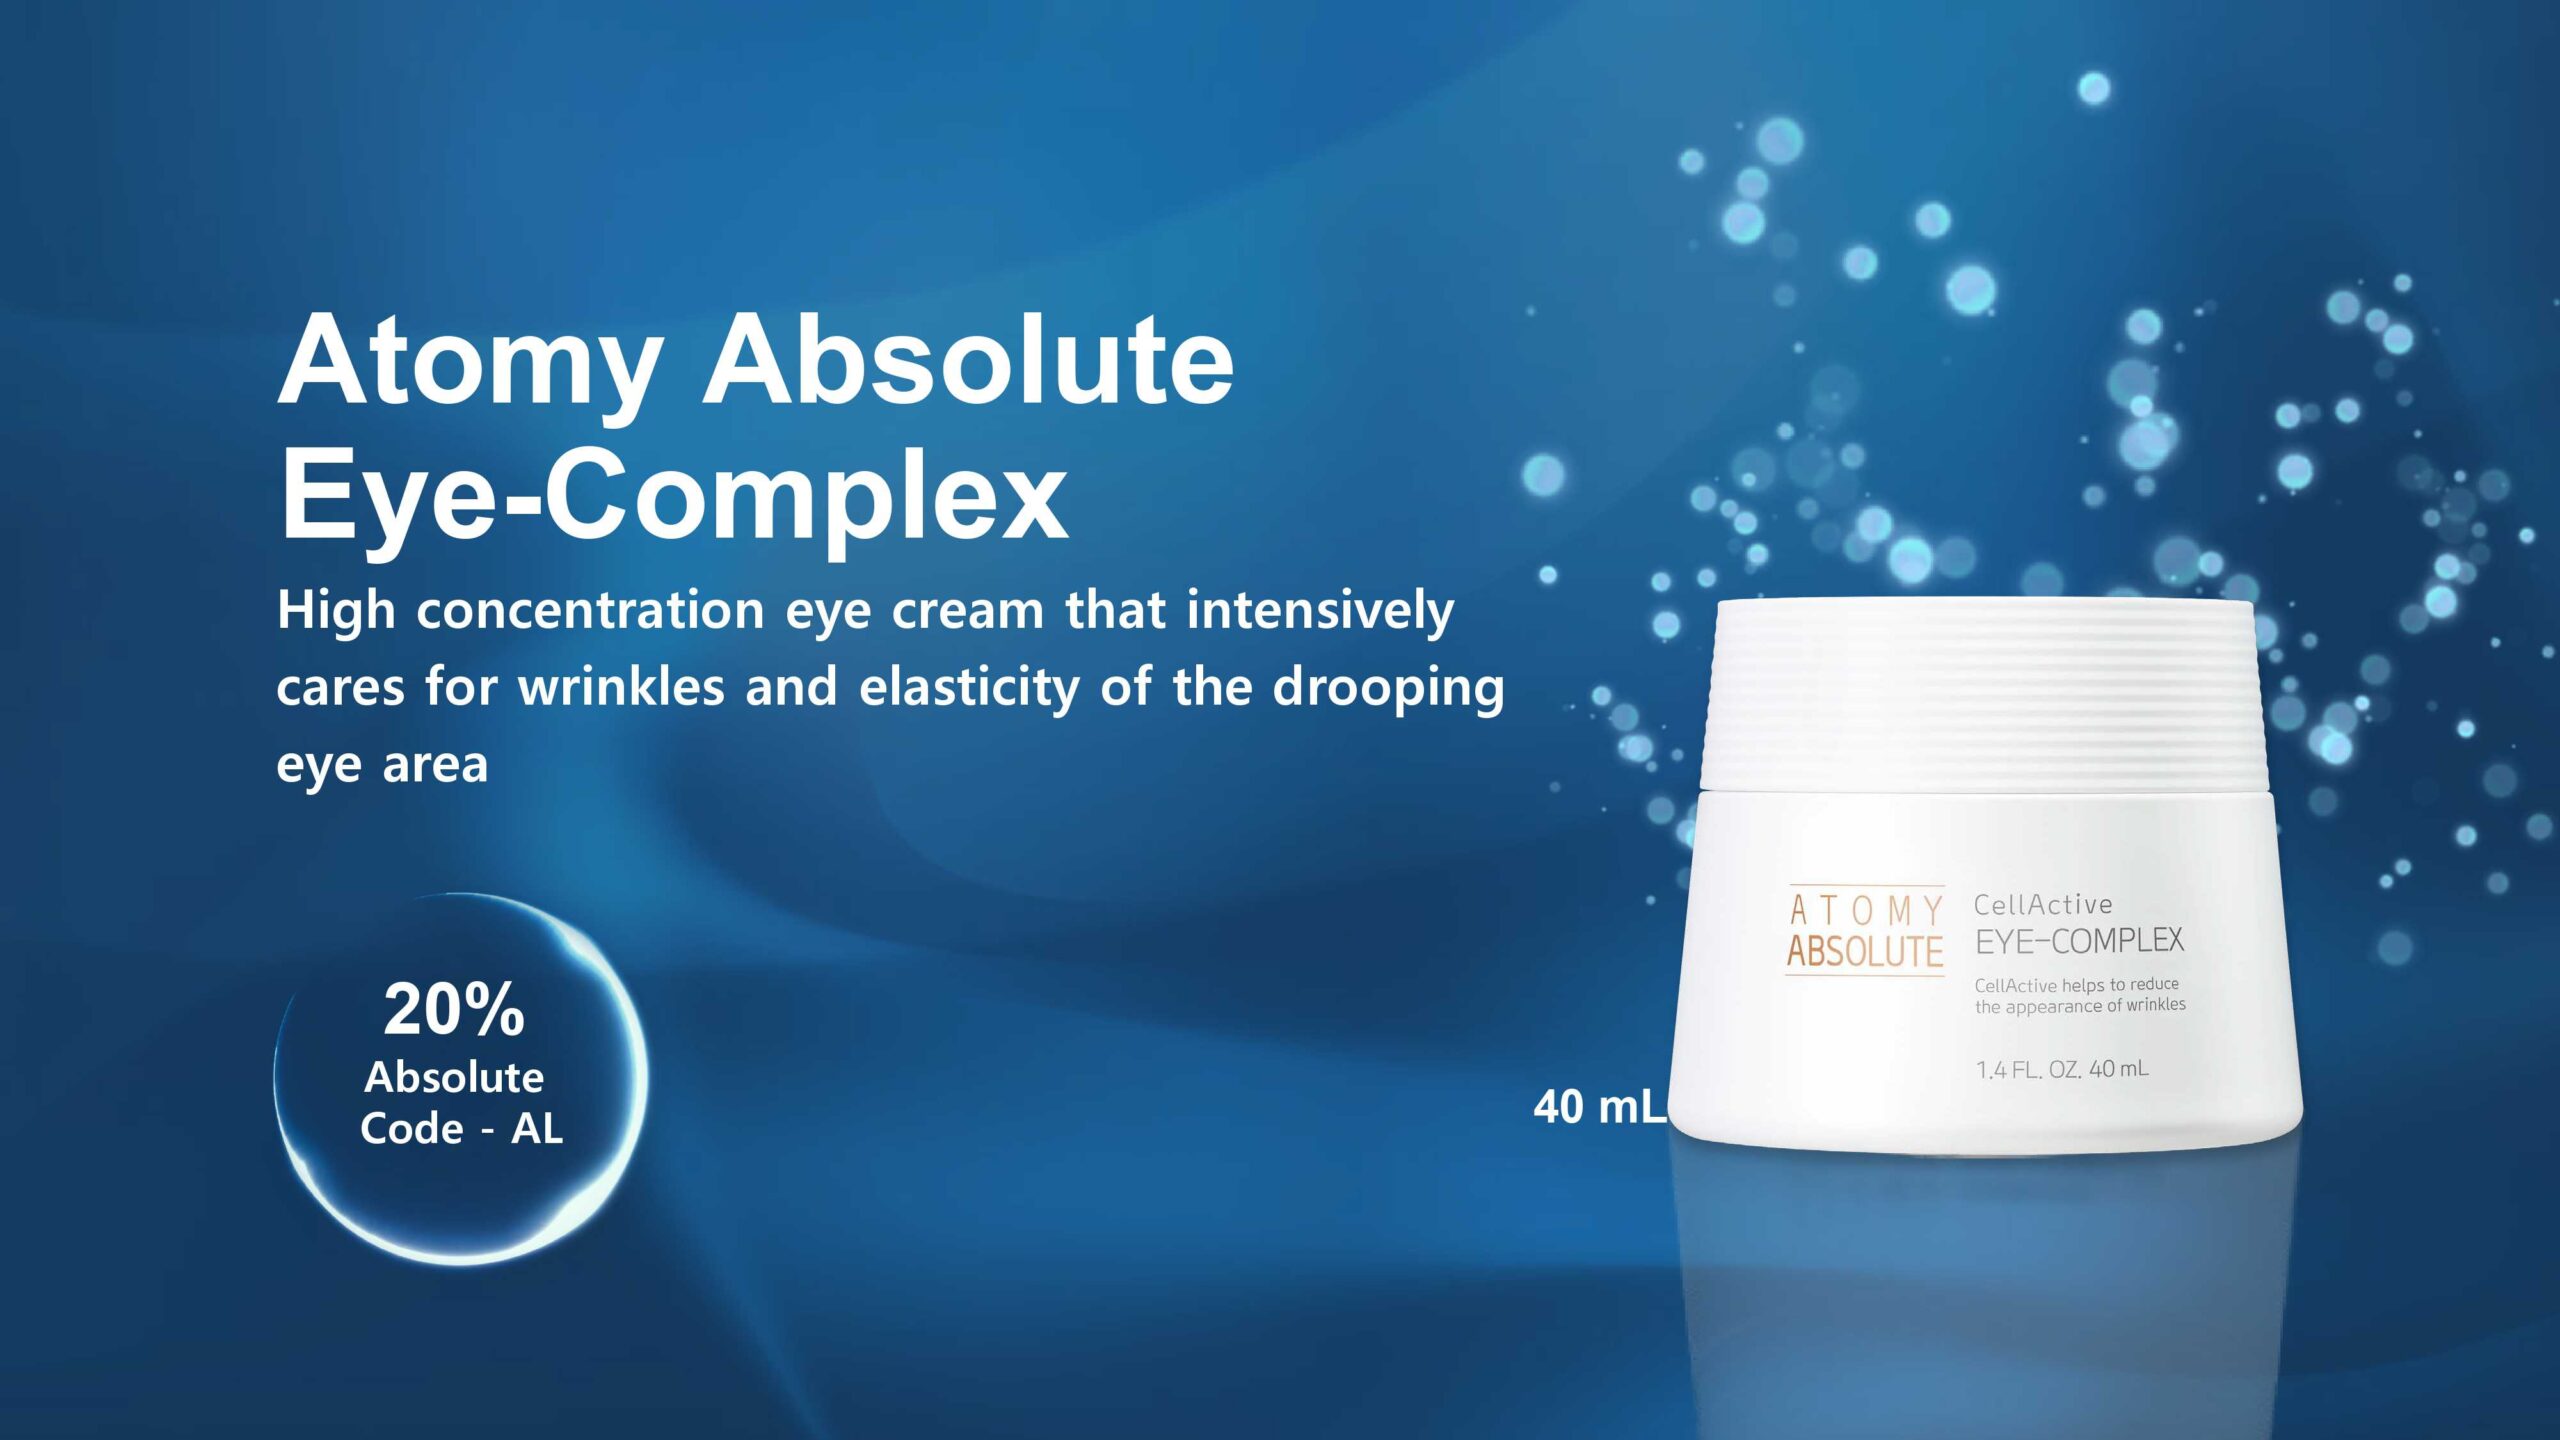 ATOMY Absolute Cell Active Skincare Set